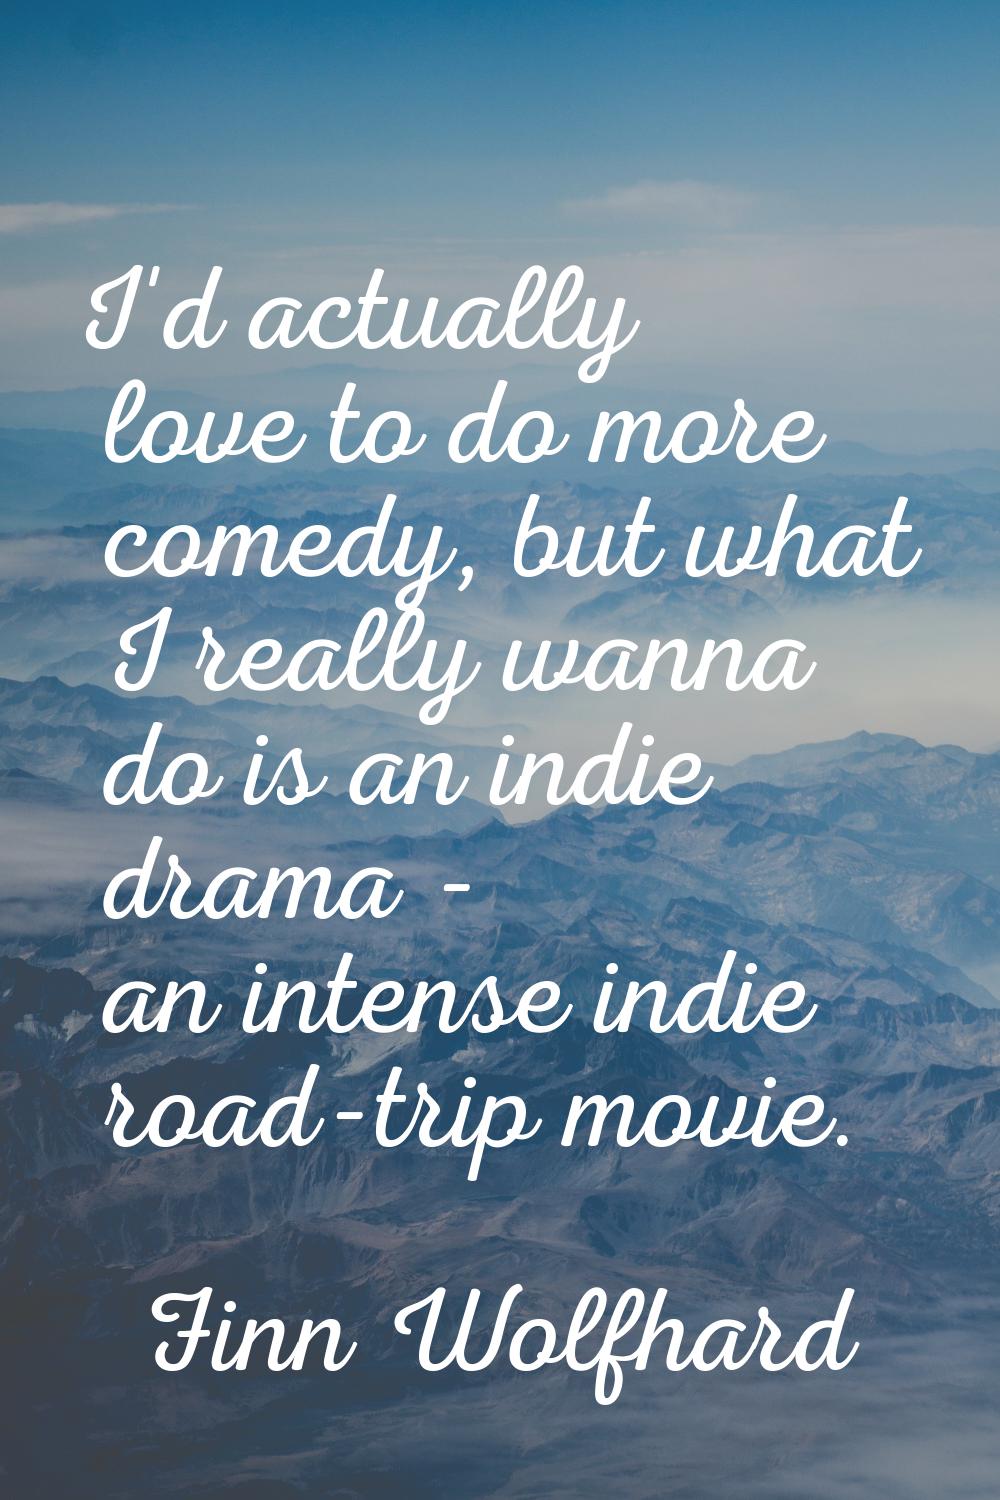 I'd actually love to do more comedy, but what I really wanna do is an indie drama - an intense indi